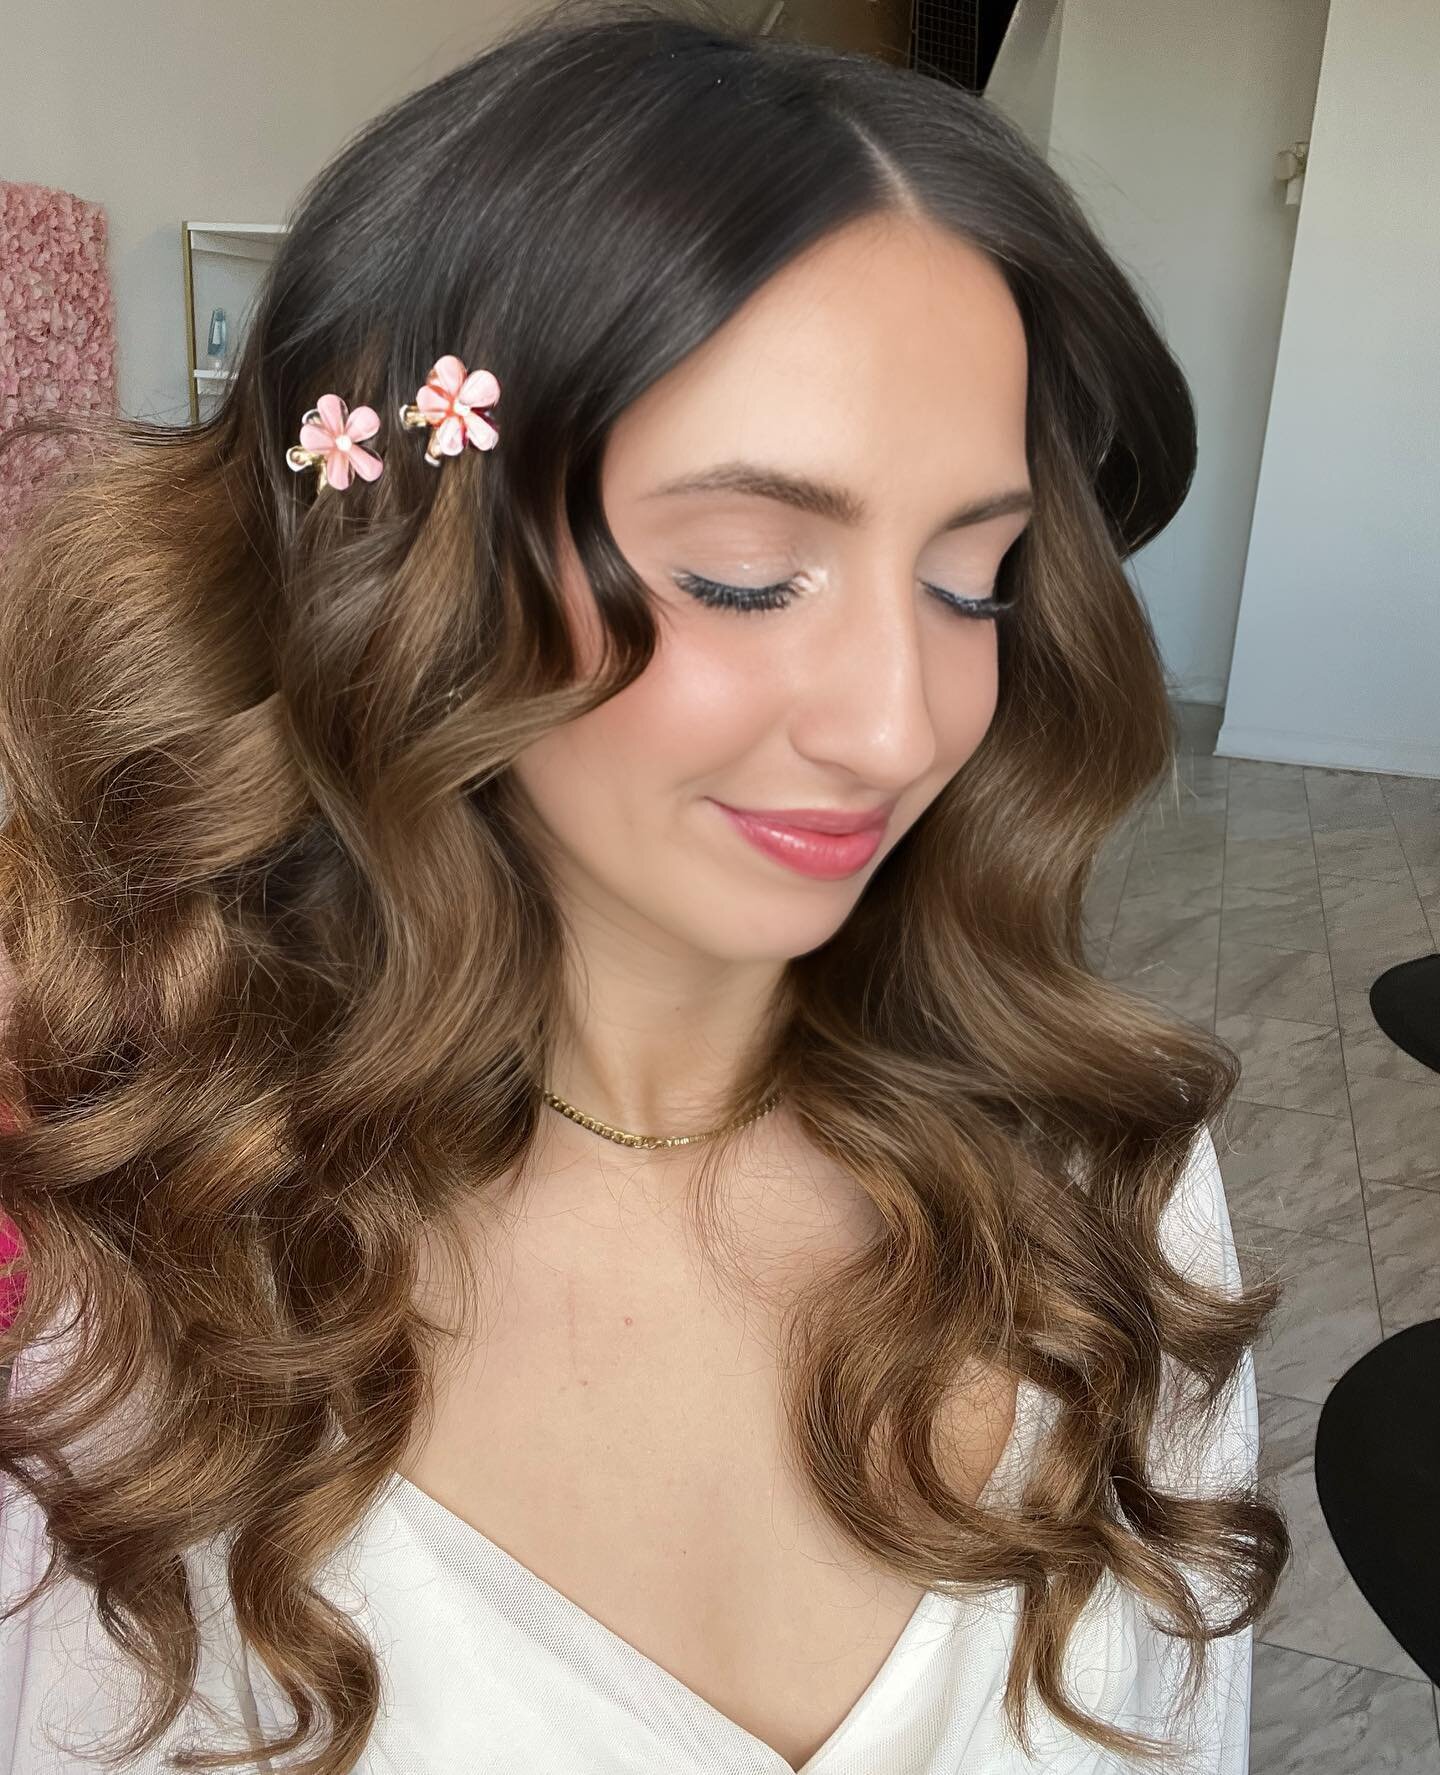 She&rsquo;s giving 90s glam! 🌸

To get this look click the link in our bio to book! 

#glamhair #90shair #glamhair #hairboutique #glamwaves #haircurls #westchesterborough #westchester #westchesteruniversity #westchestersalon #westchesterweddings #we